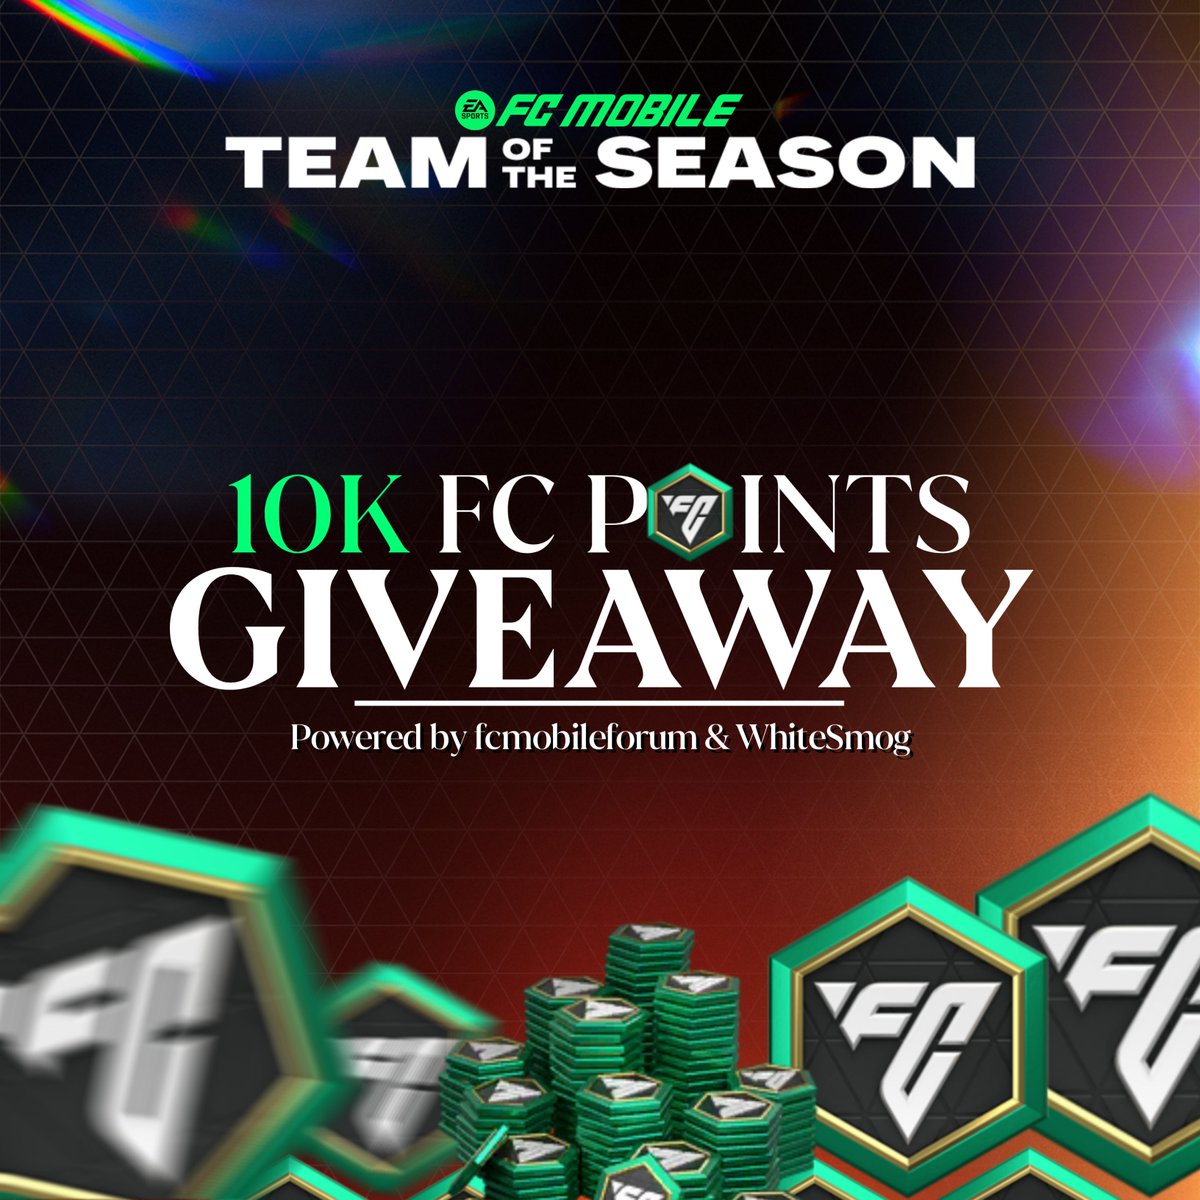 10,000 FC POINTS GIVEAWAY 🥳🎁 - Follow us & @WhiteSmog - Like ❤️ & Retweet 🔁 That's it Winner announced on 24th May, Good luck everyone 🎉🥳